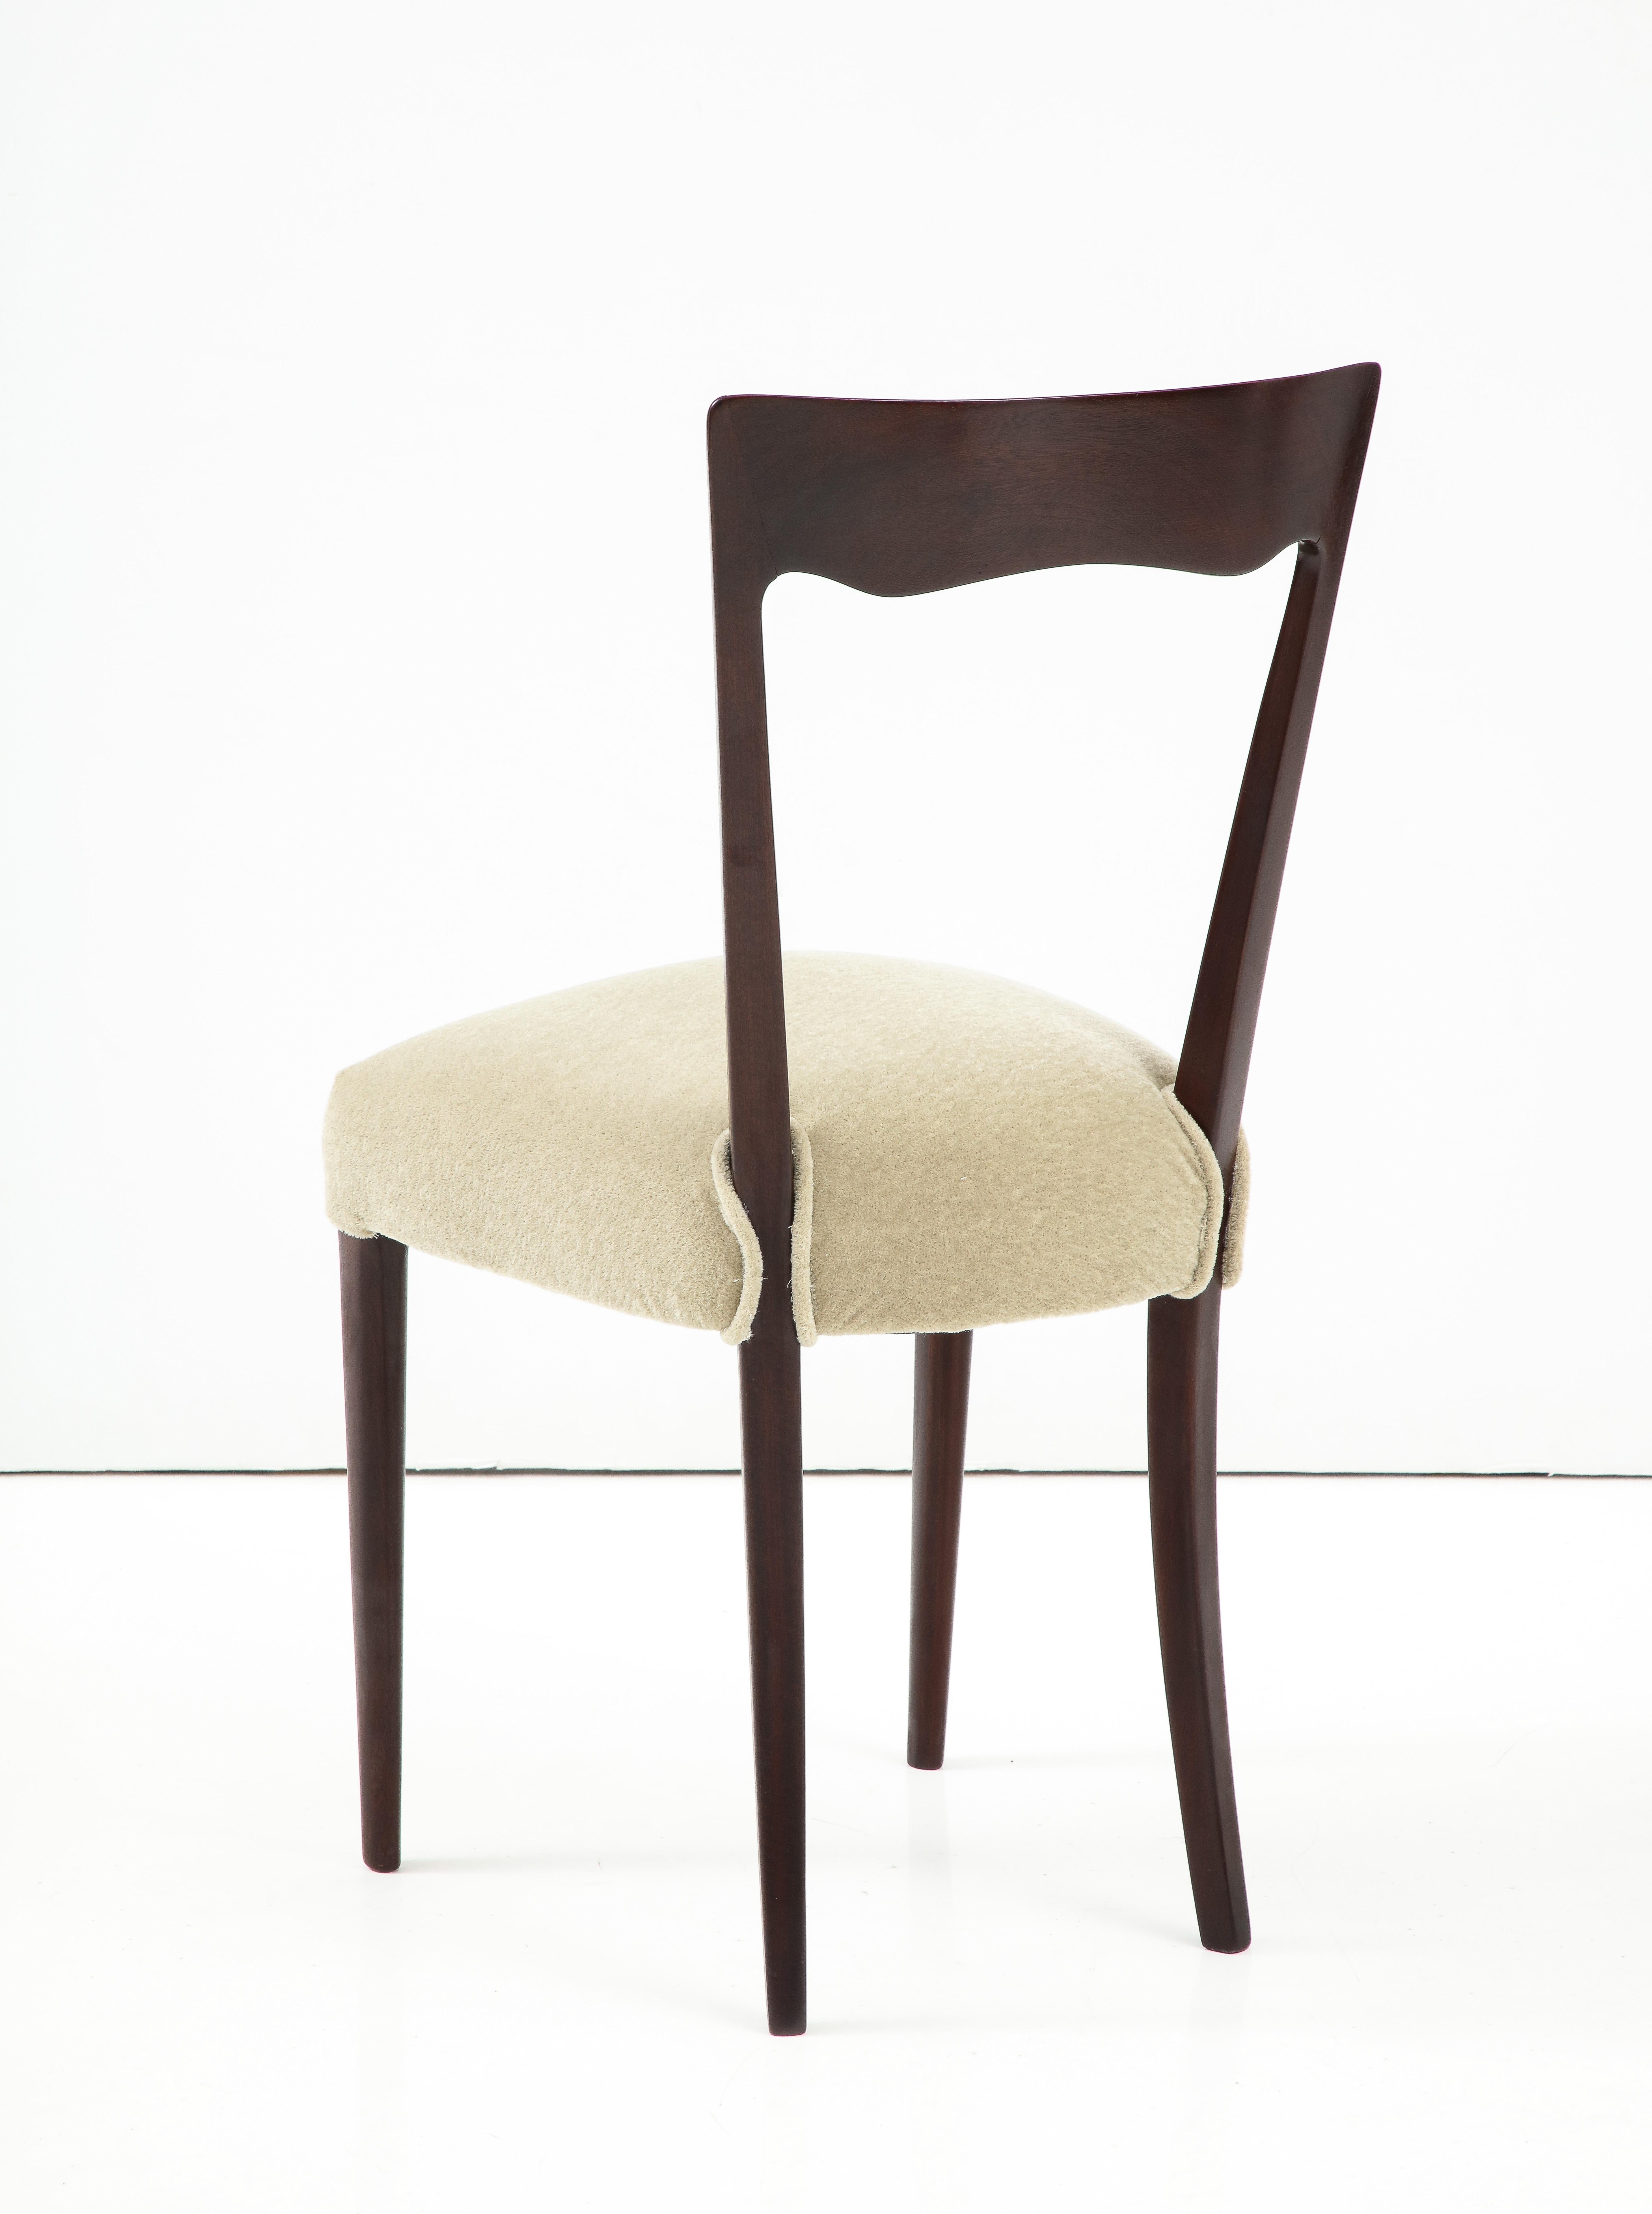 1950's Modernist Italian Dining Chairs In Mohair Upholstery 7